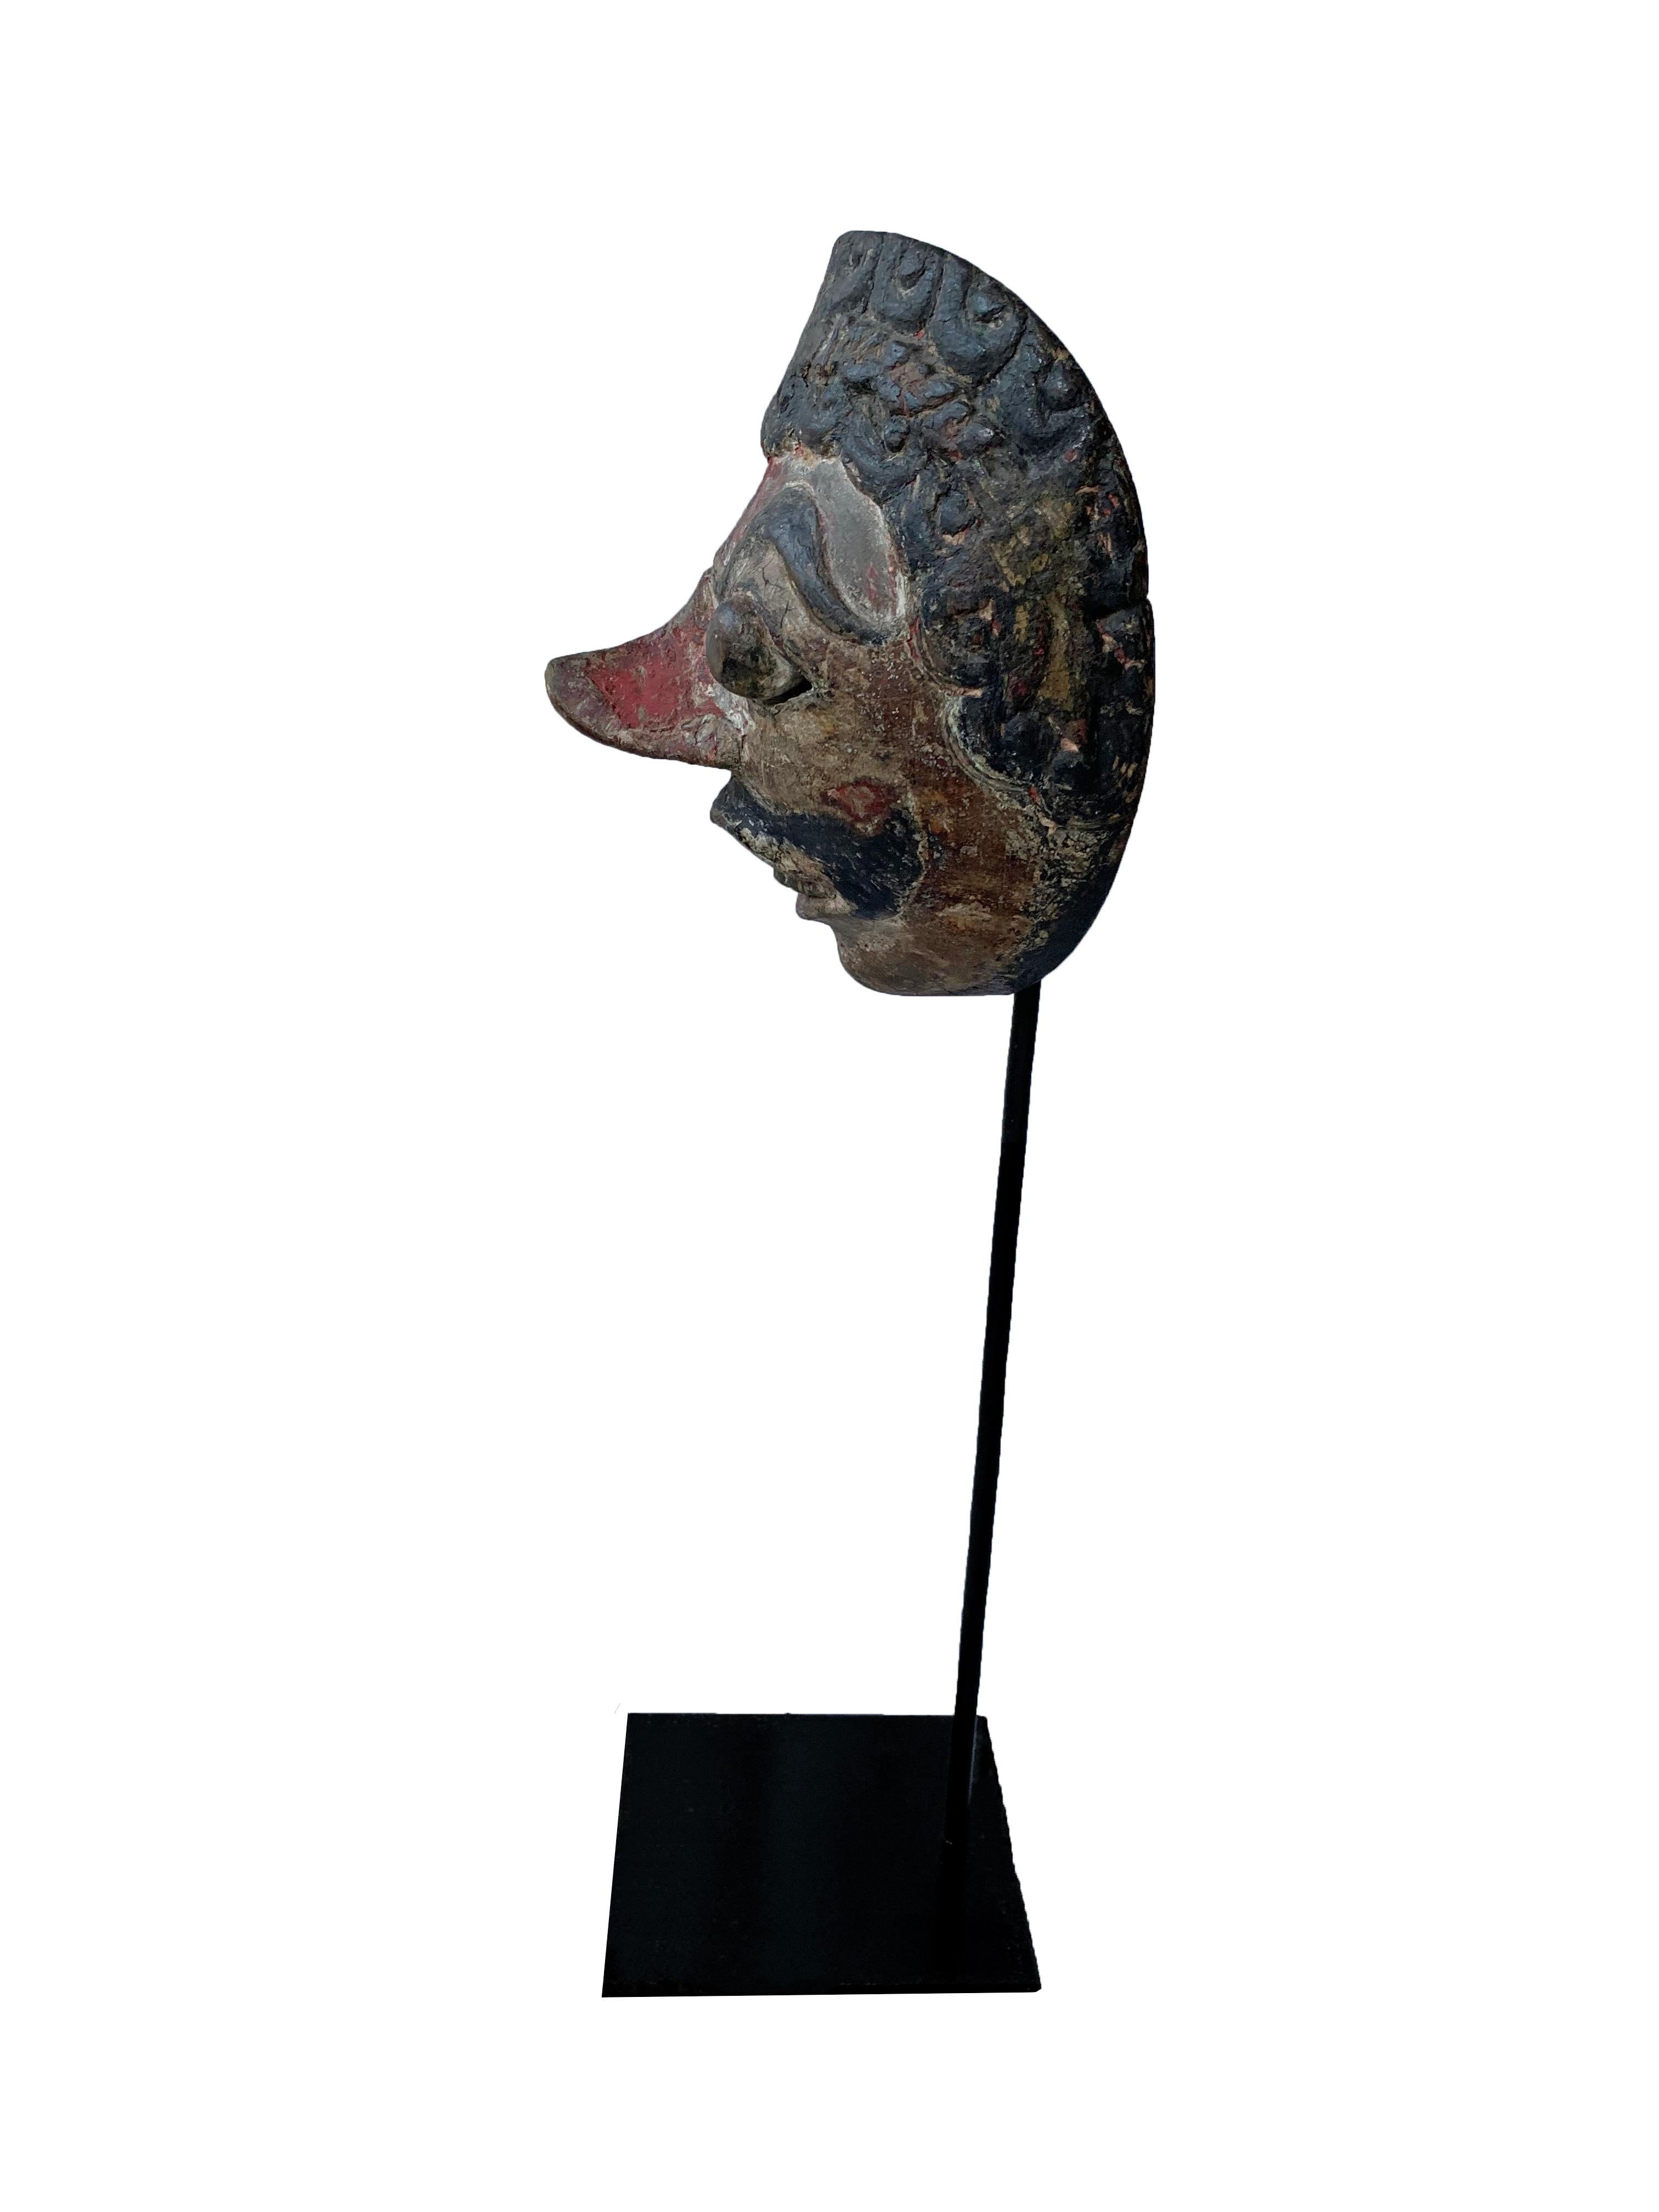 A visibly old mask from the Javanese masks theatre ‘wayang topeng’: carved from hard wood, and painted on the front side. This mask is from Cirebon in Java. With dark, reddish skin and slits either side of its pupils for the eyes through which the